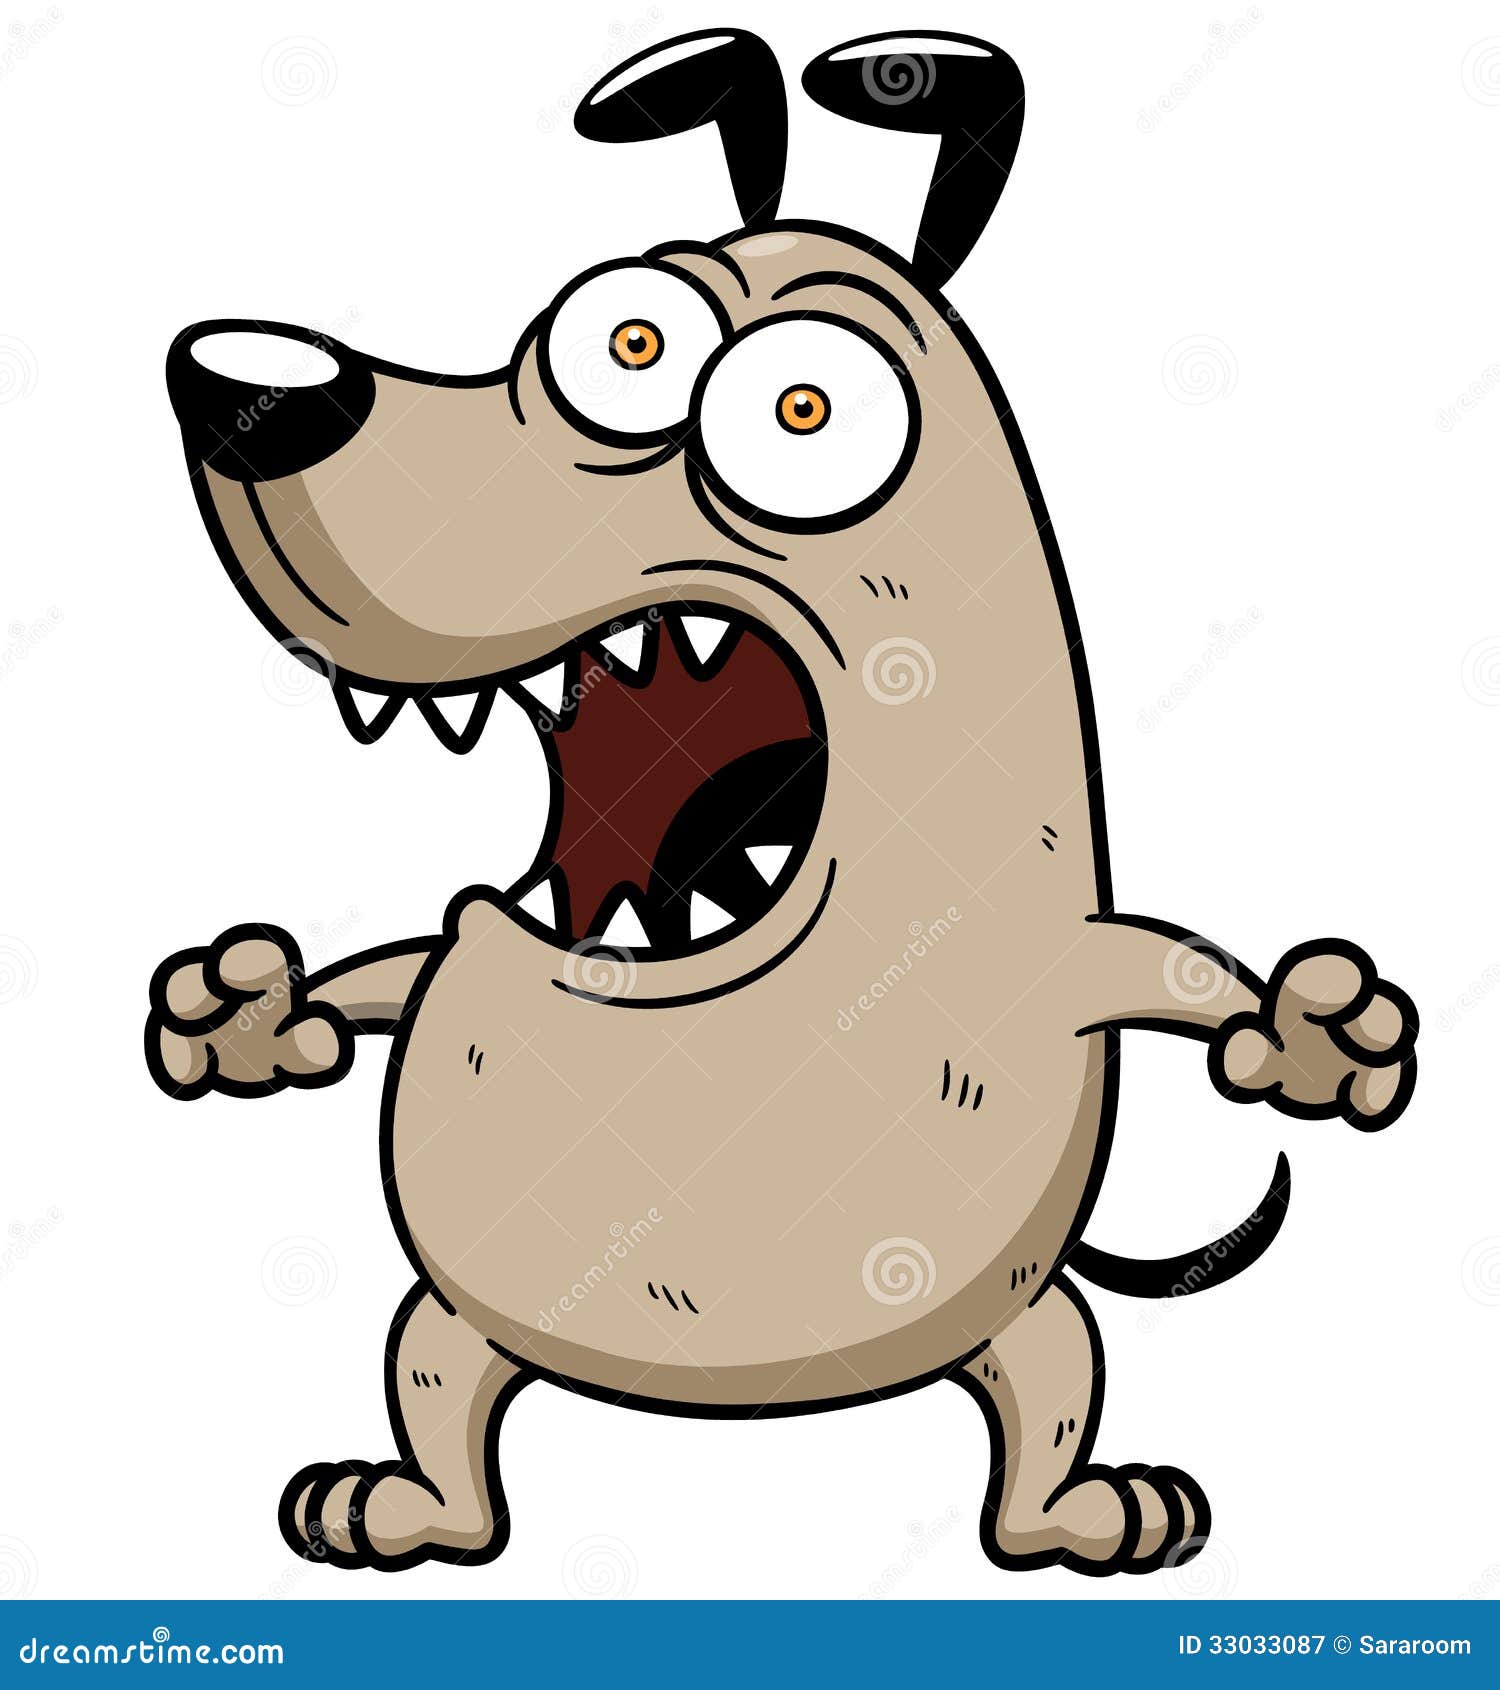 clipart angry dog - photo #38